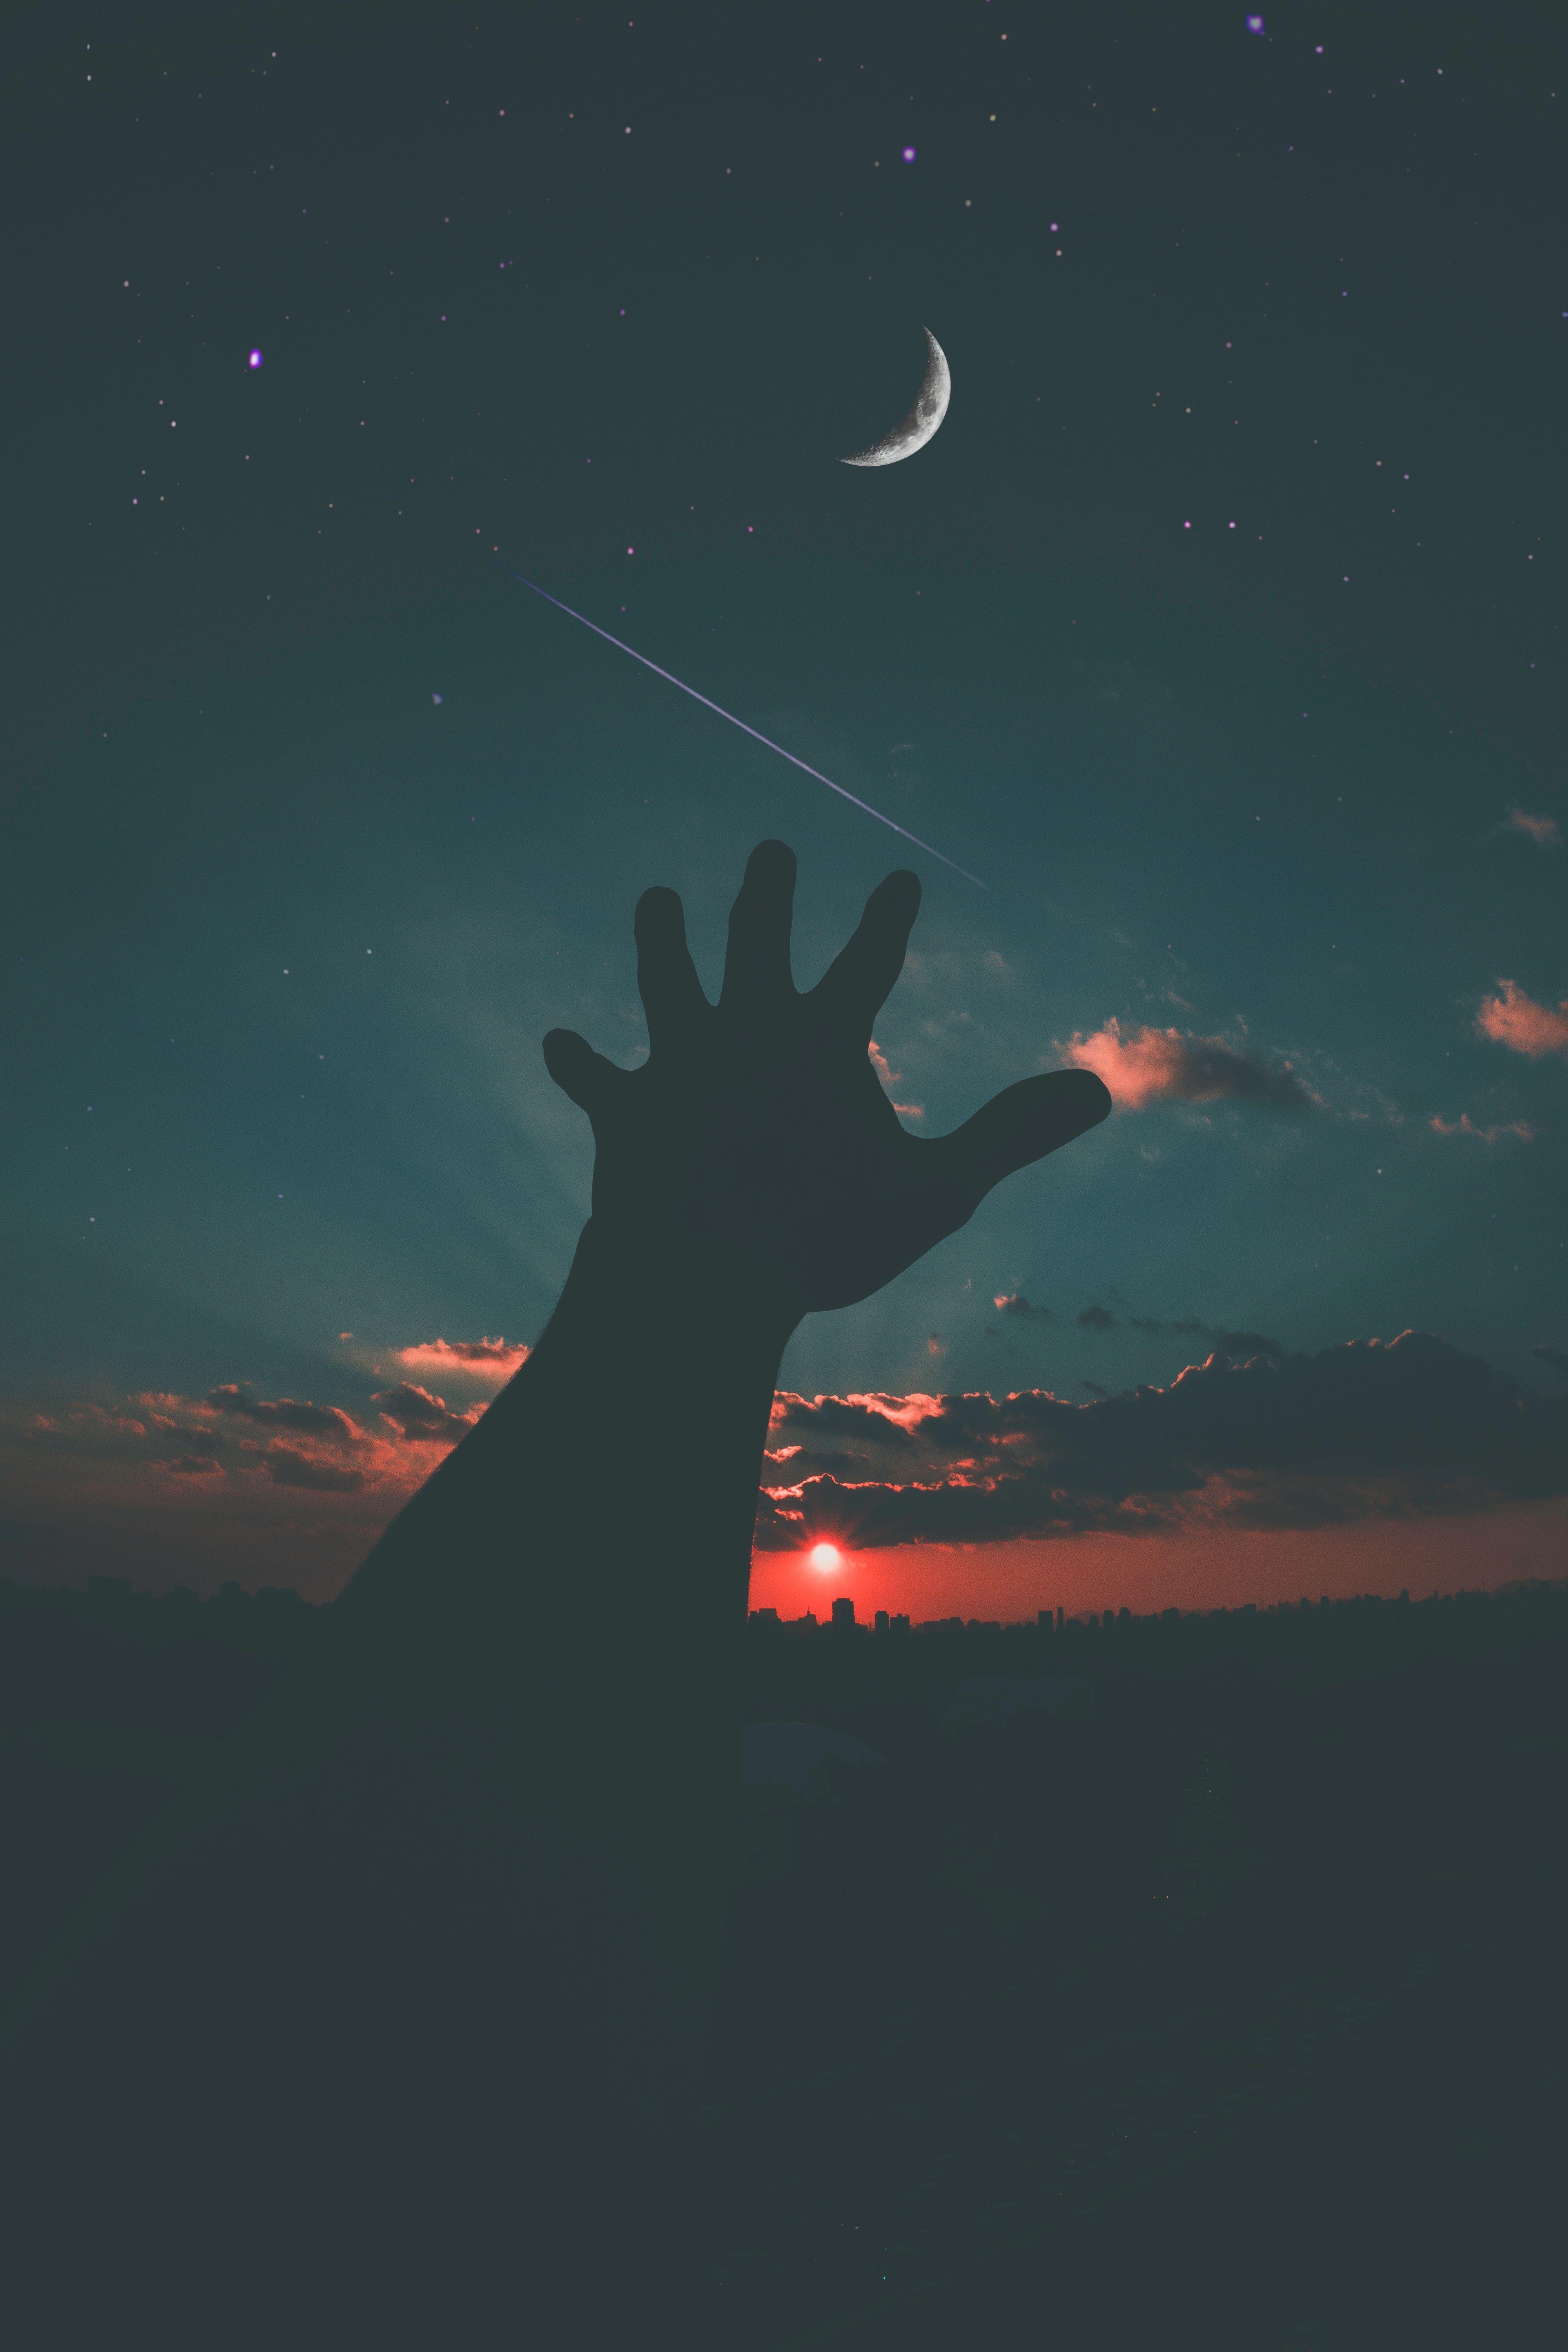 A hand reaching for the stars and the moon. - Moon, night